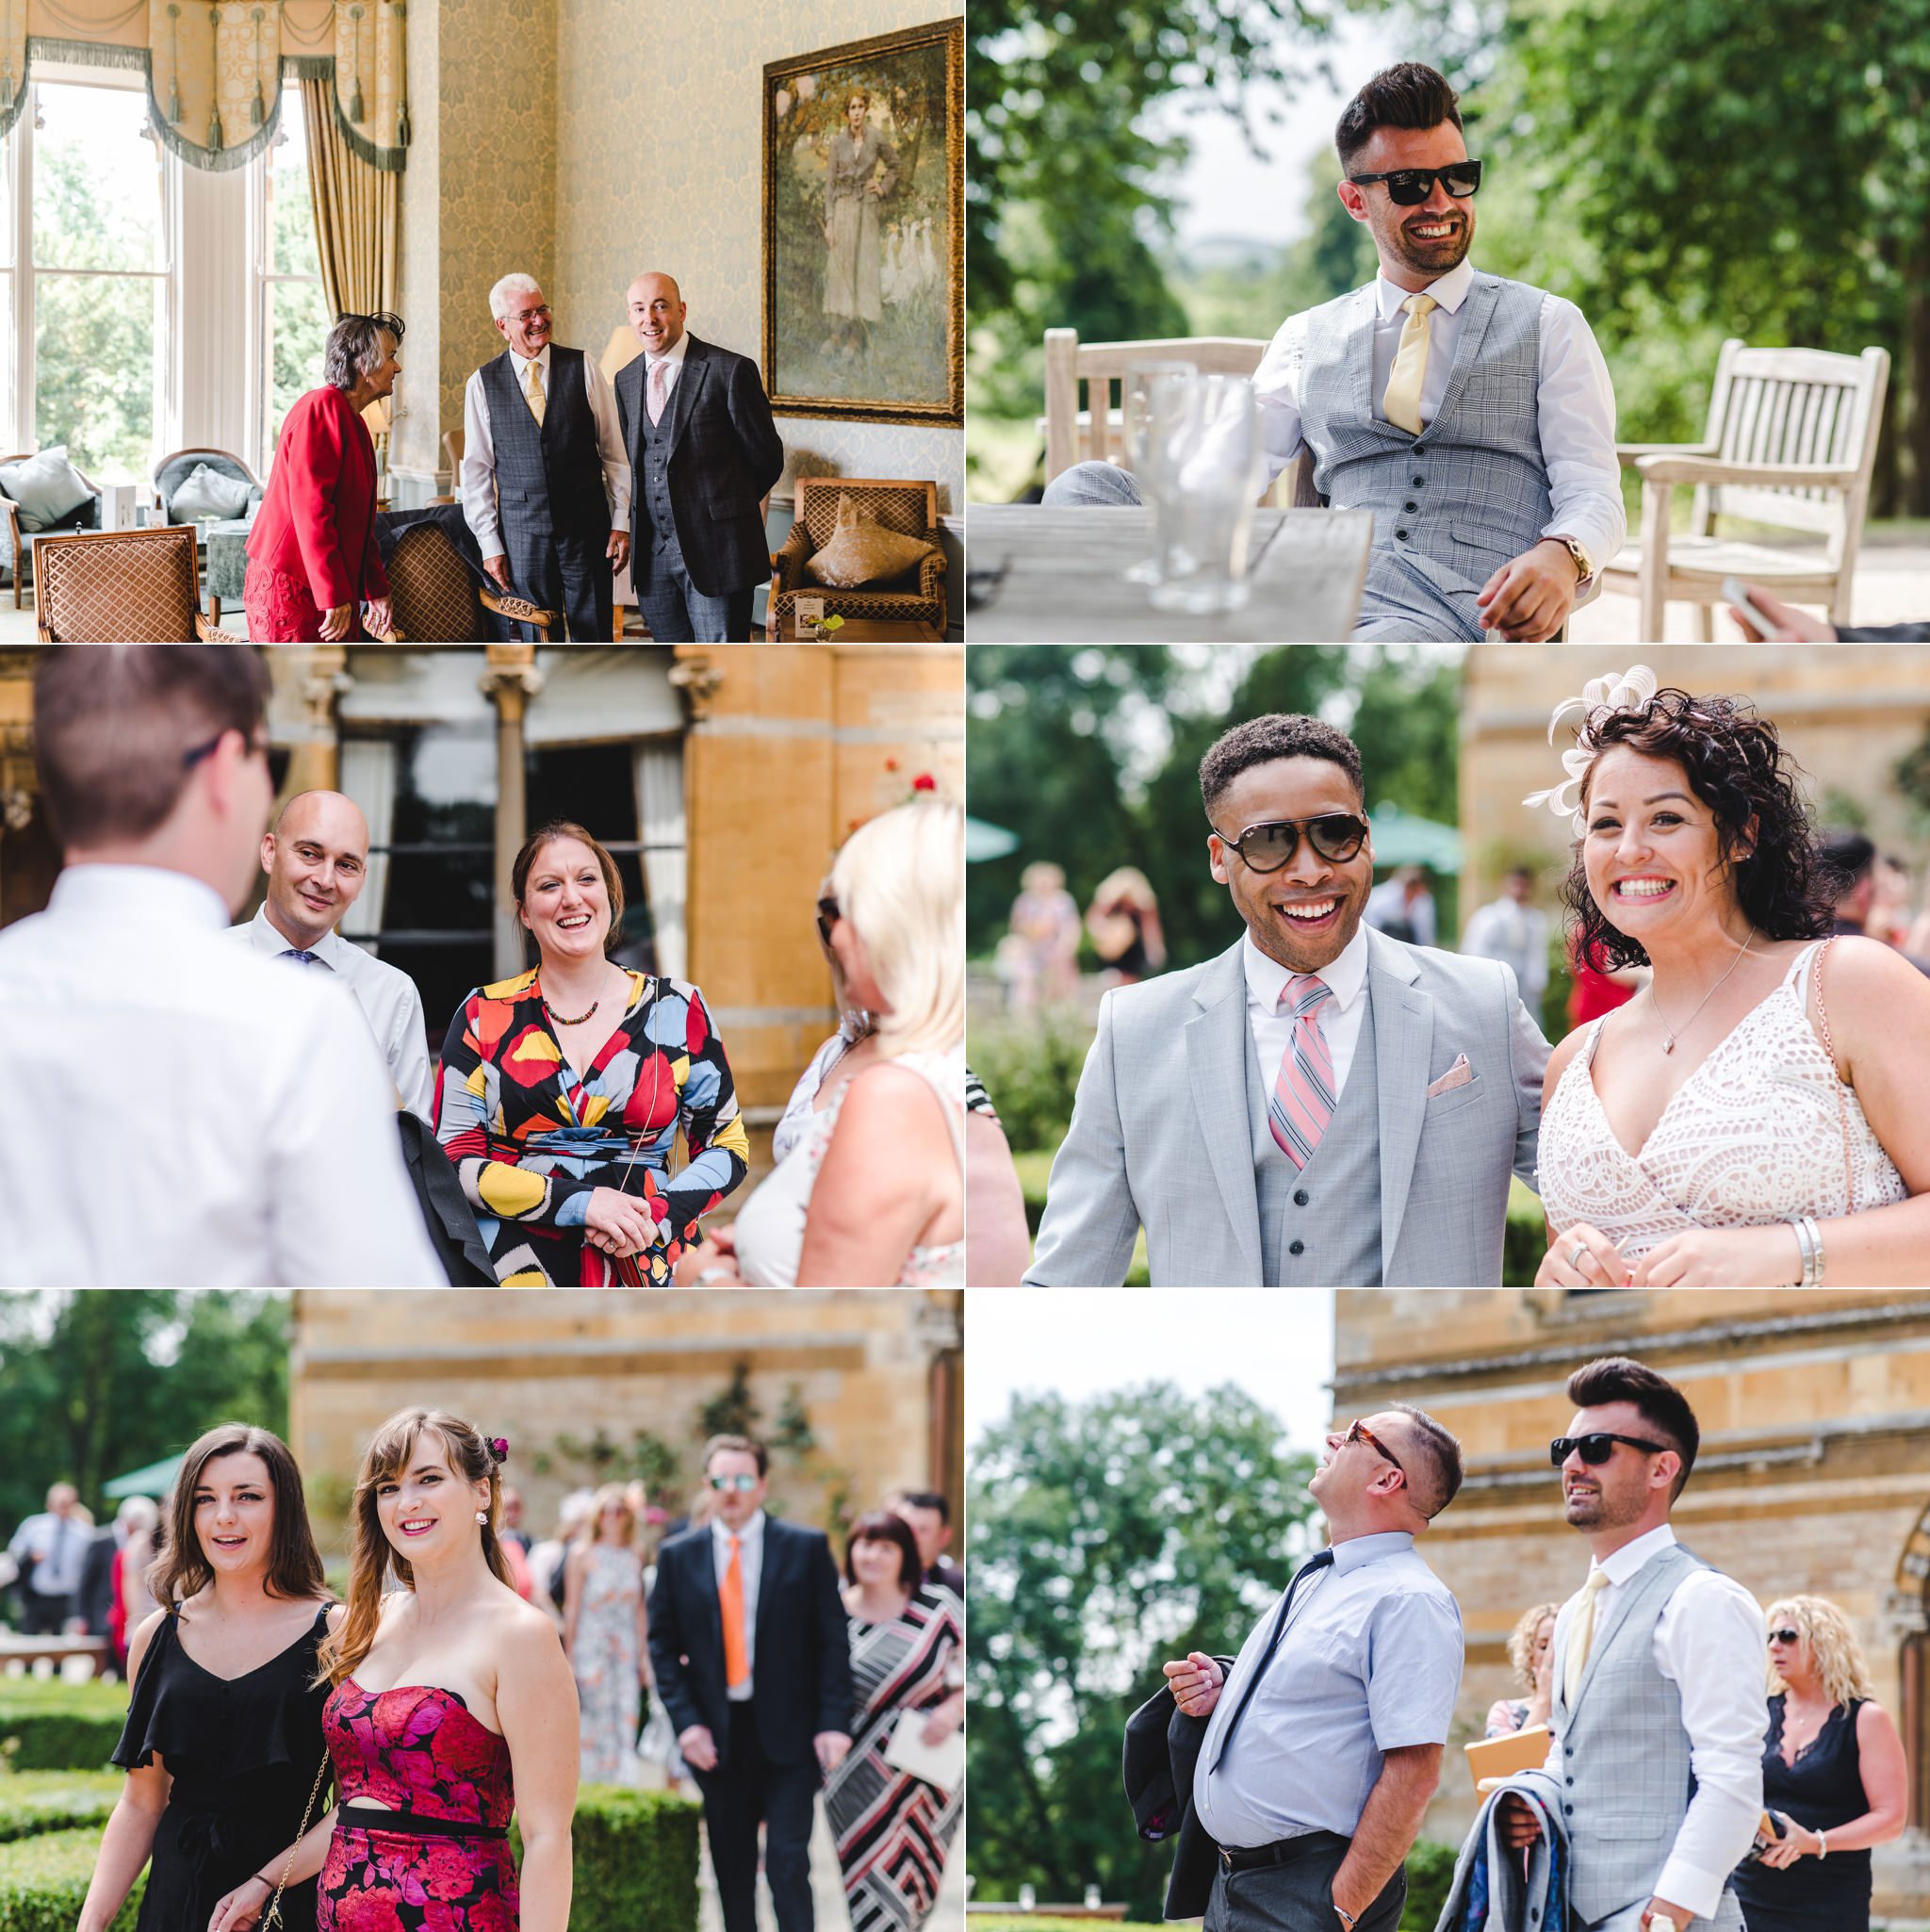 Candid relaxed pictures of wedding guests at Ettinton Park Hotel